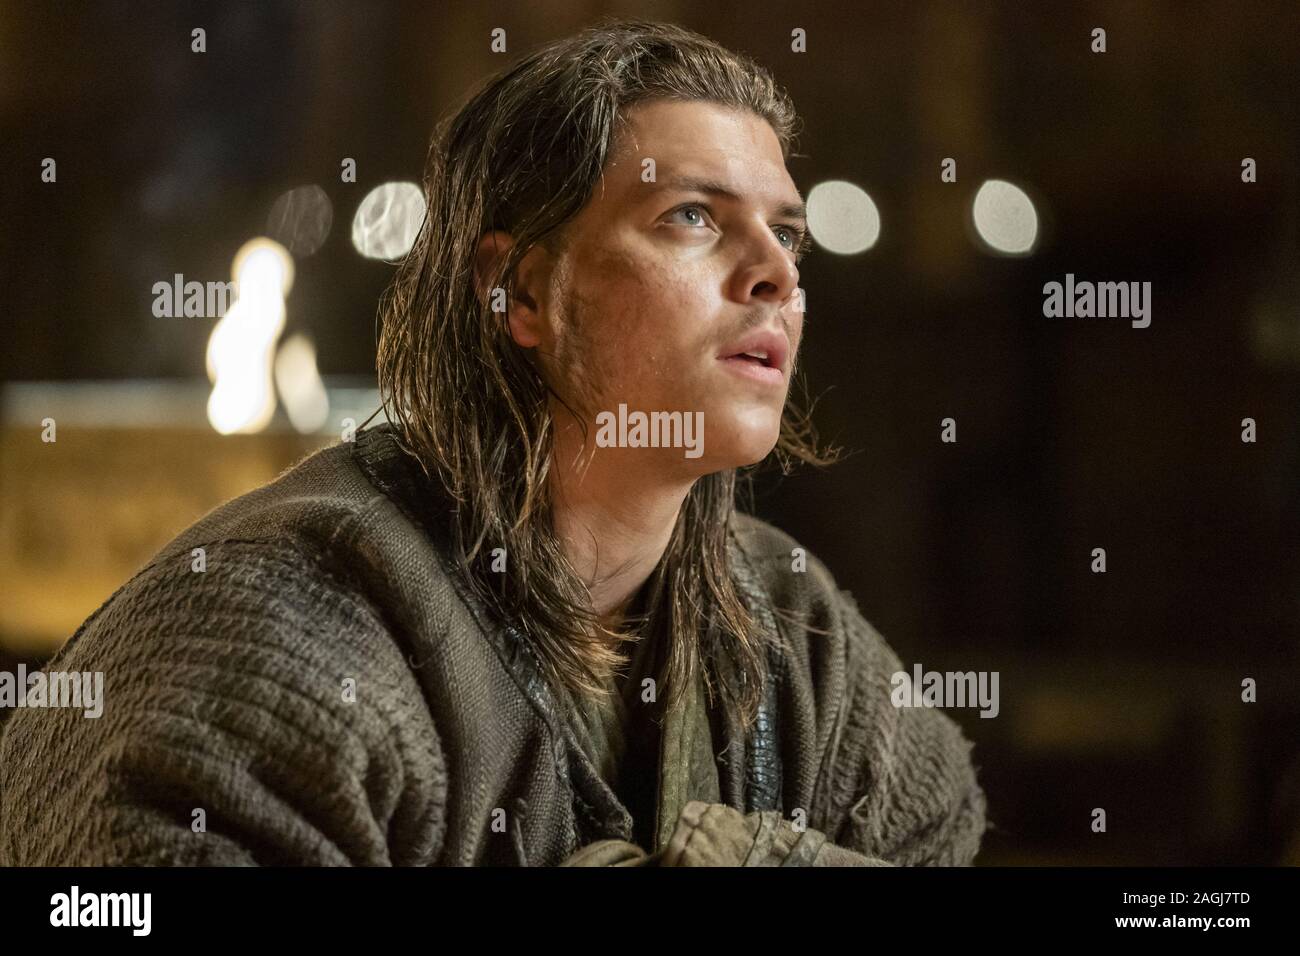 Why Alex Høgh Andersen From Vikings Is The Best Thing To Happen To TV!